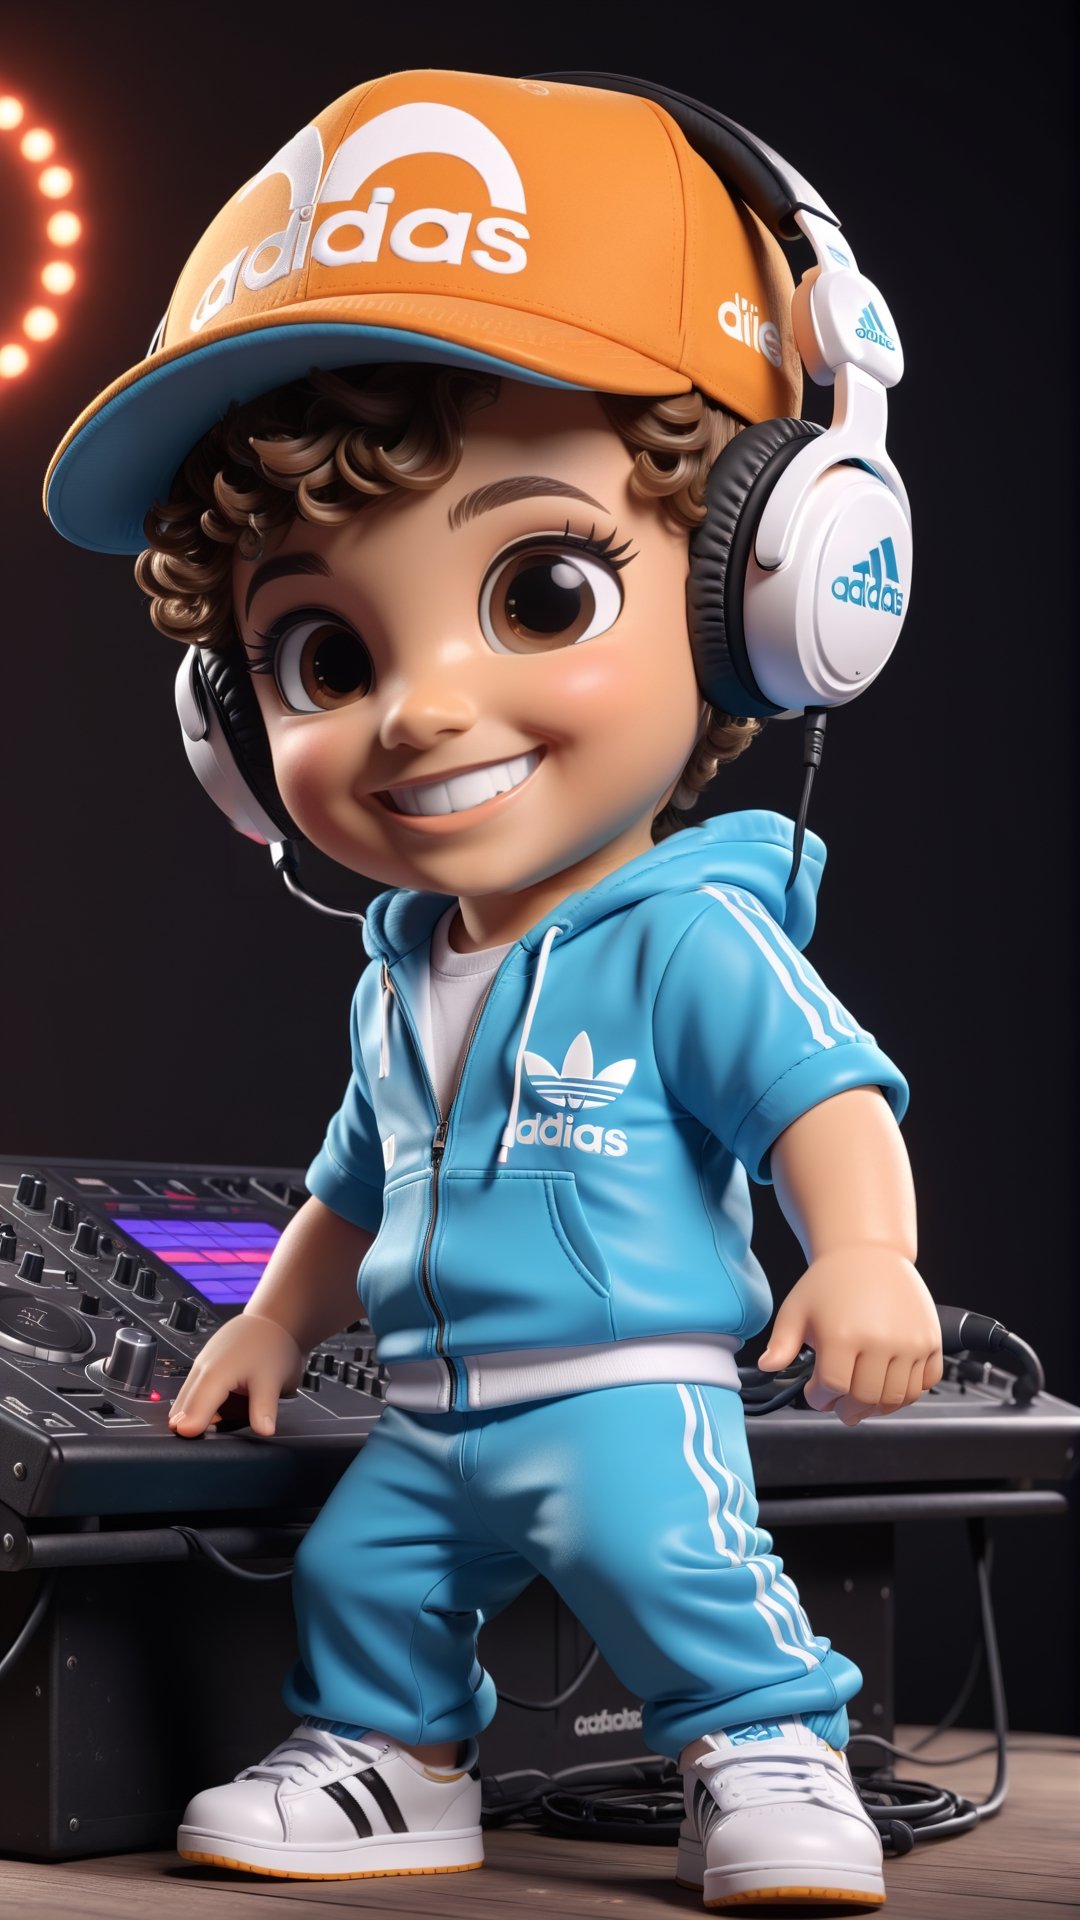 (((Dewey Decibel text logo))),  dancing and DJing, 3d figure,  1 boy,  brown curly hair, light brown/hazel eyes, piercings,((backwards hat)), adidas jump suit outfit,  cute smile,  famous DJ,  very popular,  passionate, bad ass, dressed retro/furutistic,  Electronic music, (((short goatee))), ((headphones wrapped around neck)), looking retro and new wave,  DJing for a huge crowd,  everyone is looking at him,3d figure,text logo,pturbo